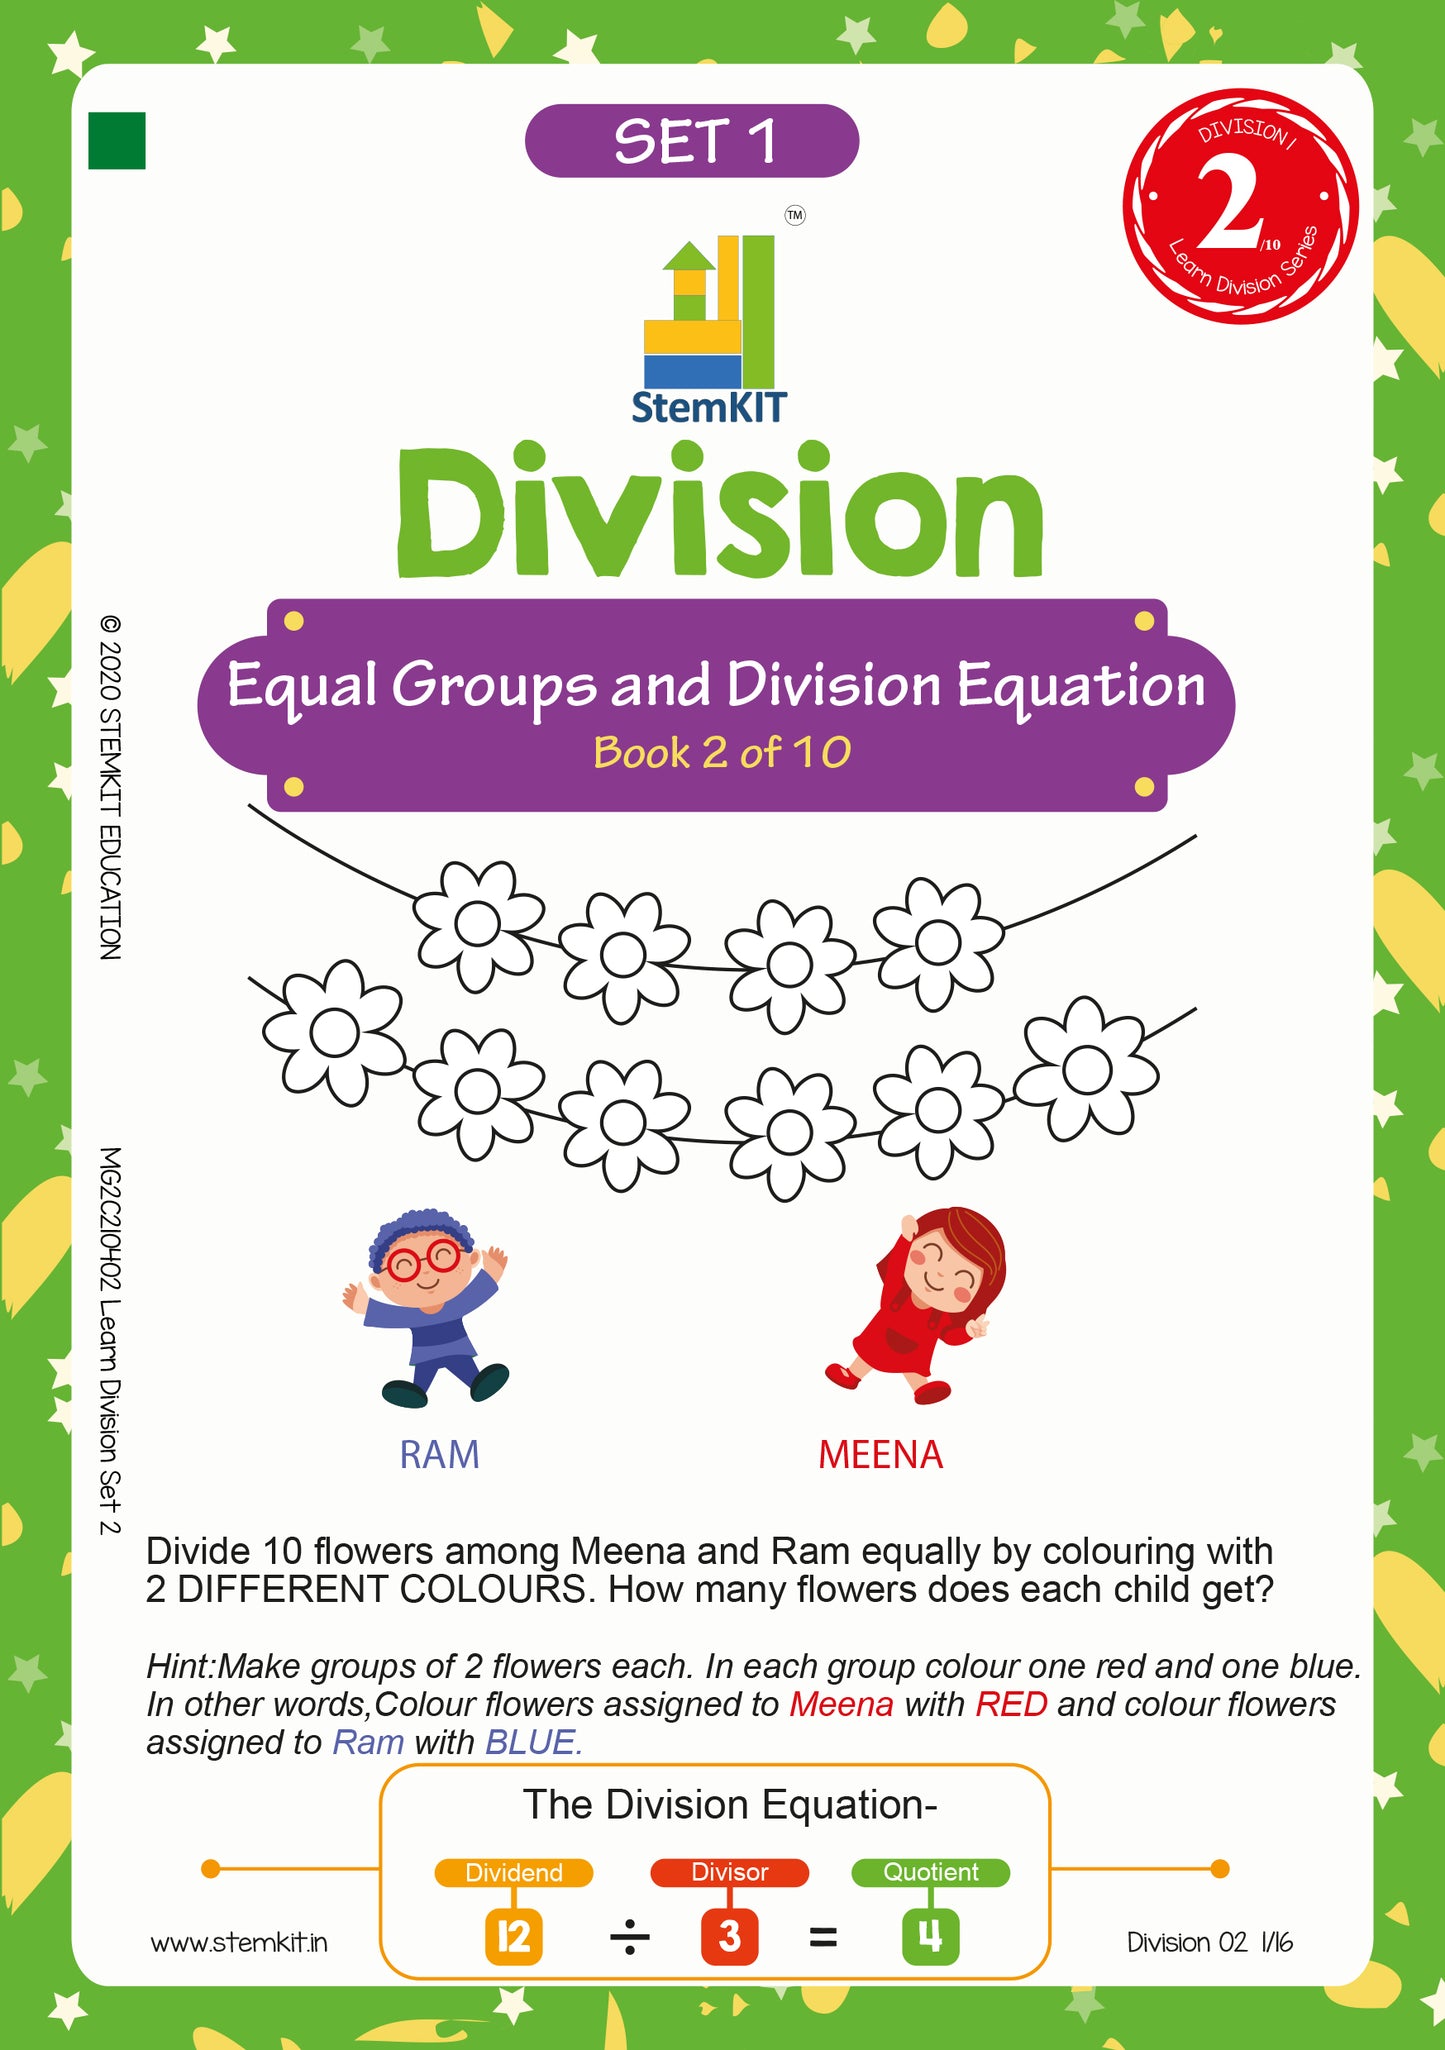 Stemkit Learn Maths Division 10 Workbooks- First Book of Division for 5-7 Year Old UKG, Grade 1, Grade 2 Children